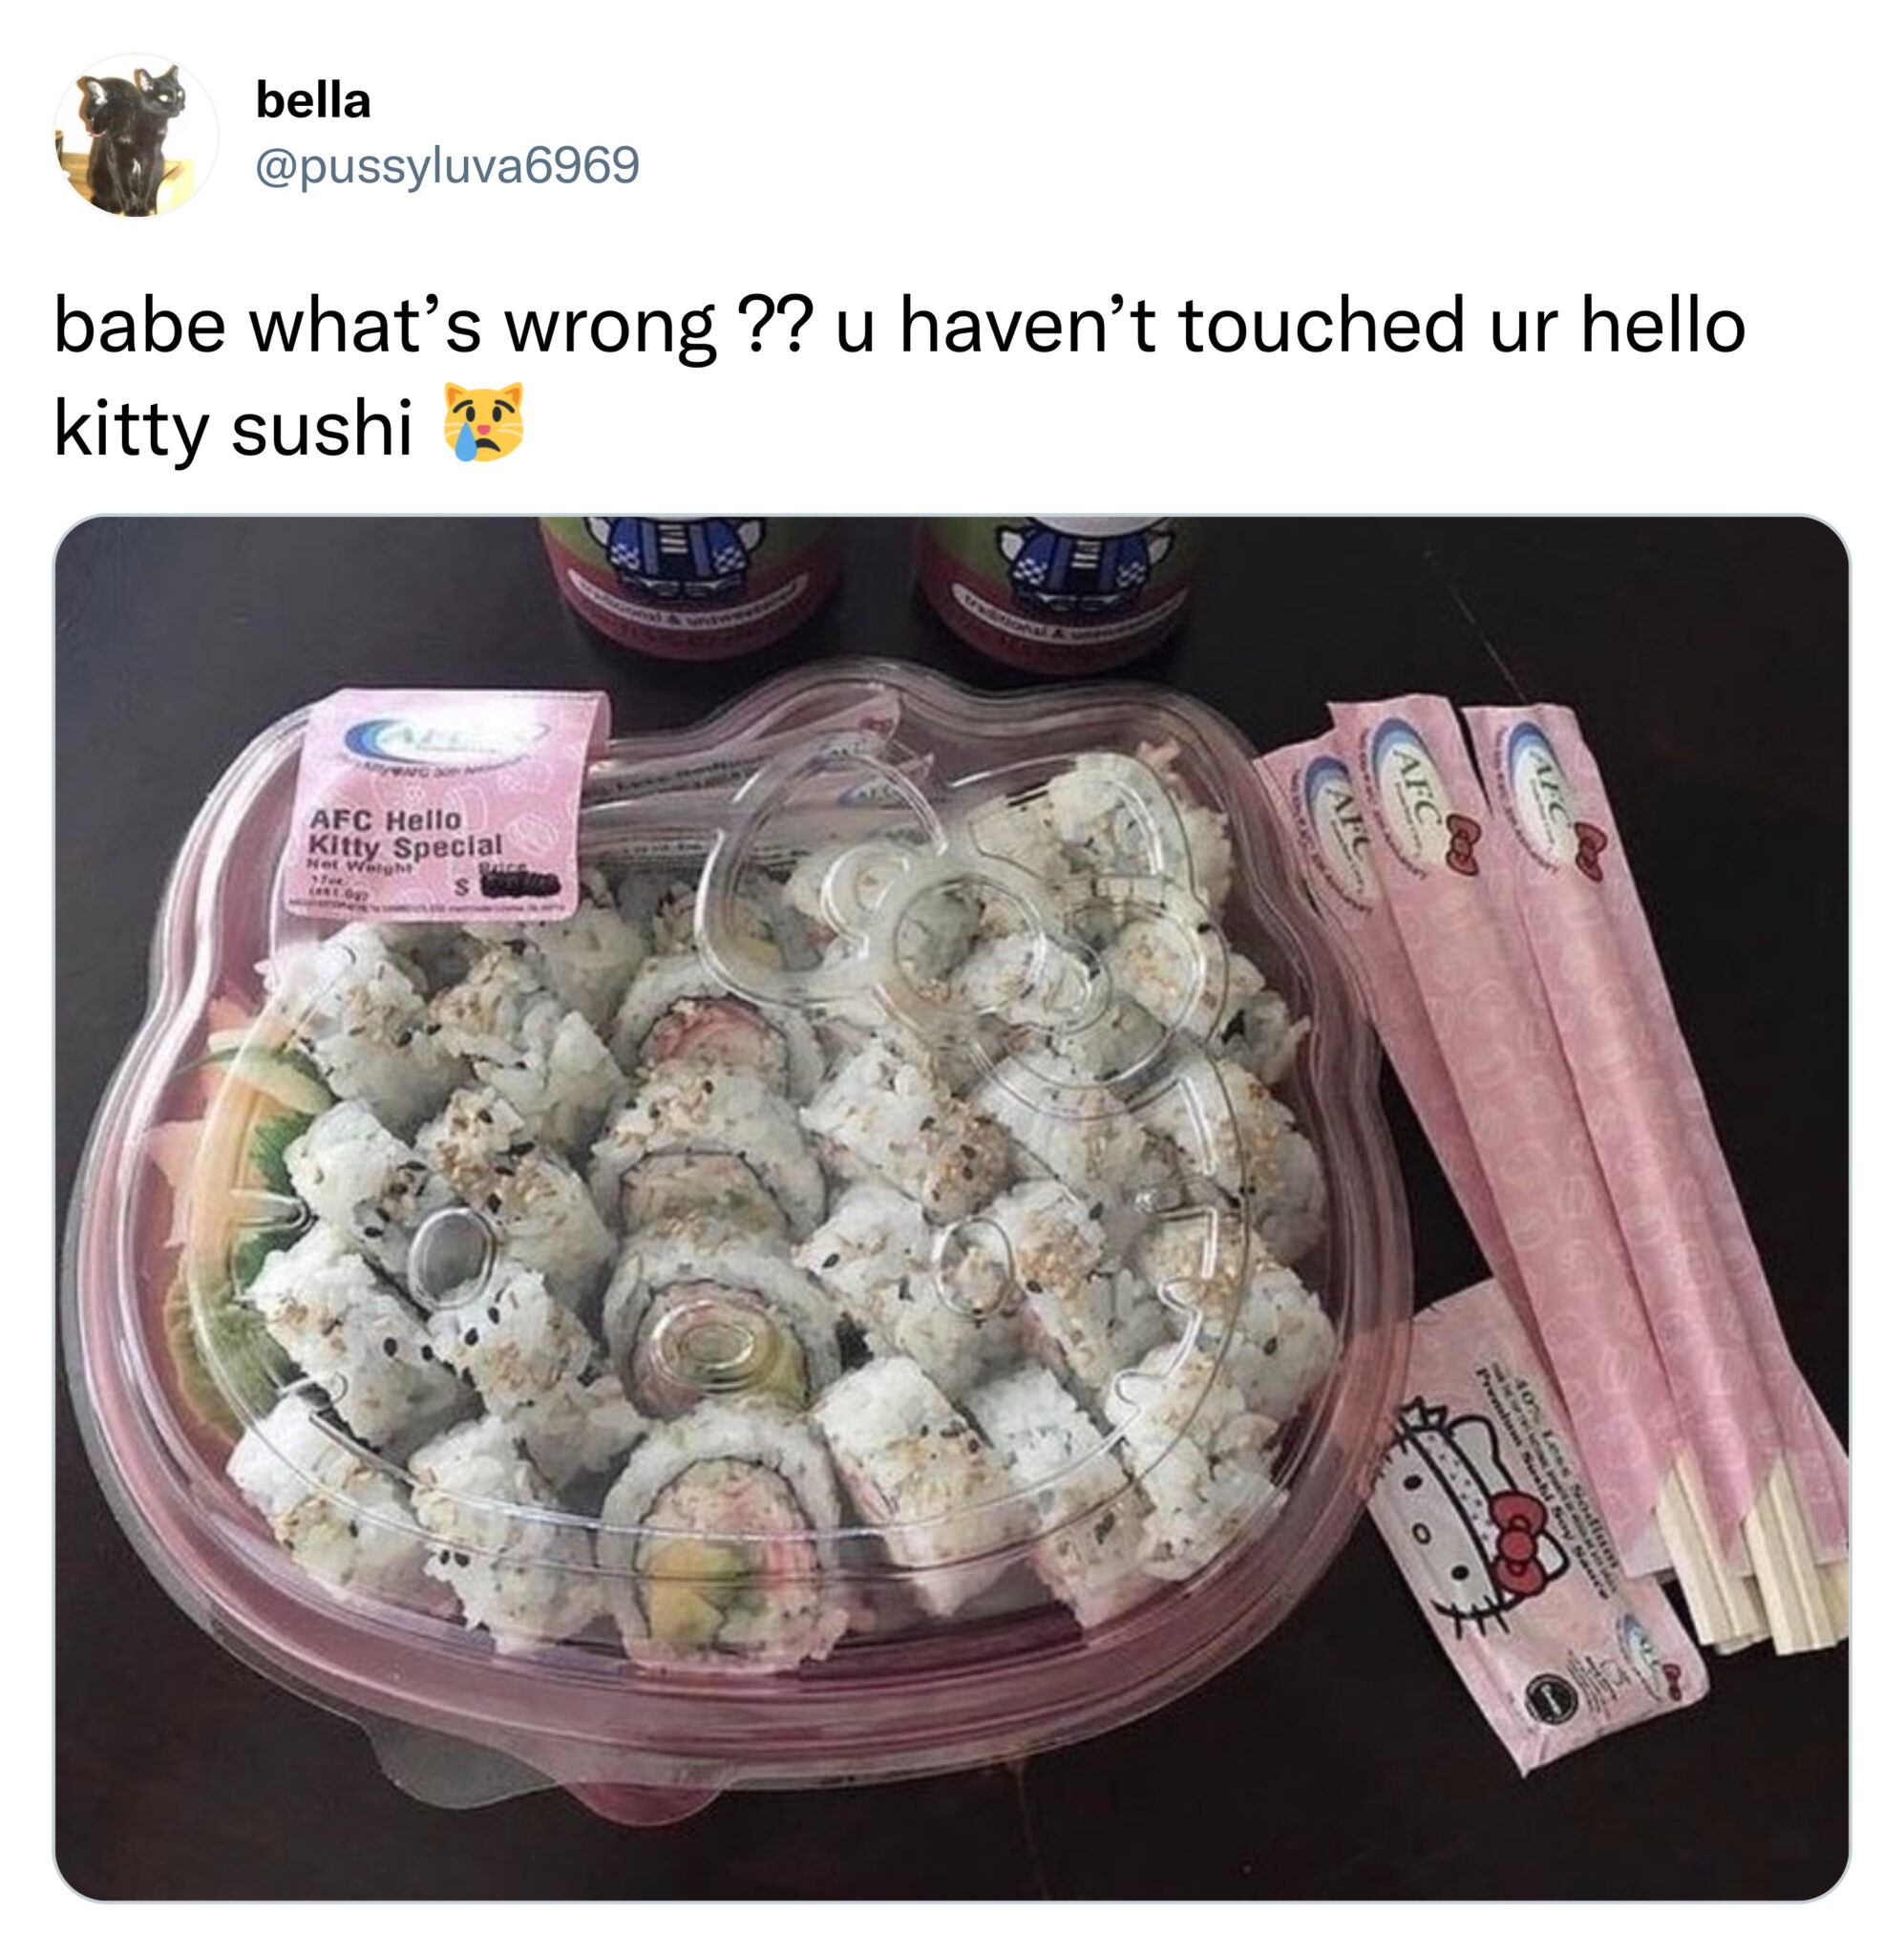 funny tweets  -  суши хеллоу китти - bella babe what's wrong?? u haven't touched ur hello kitty sushi Afc Hello Kitty Special